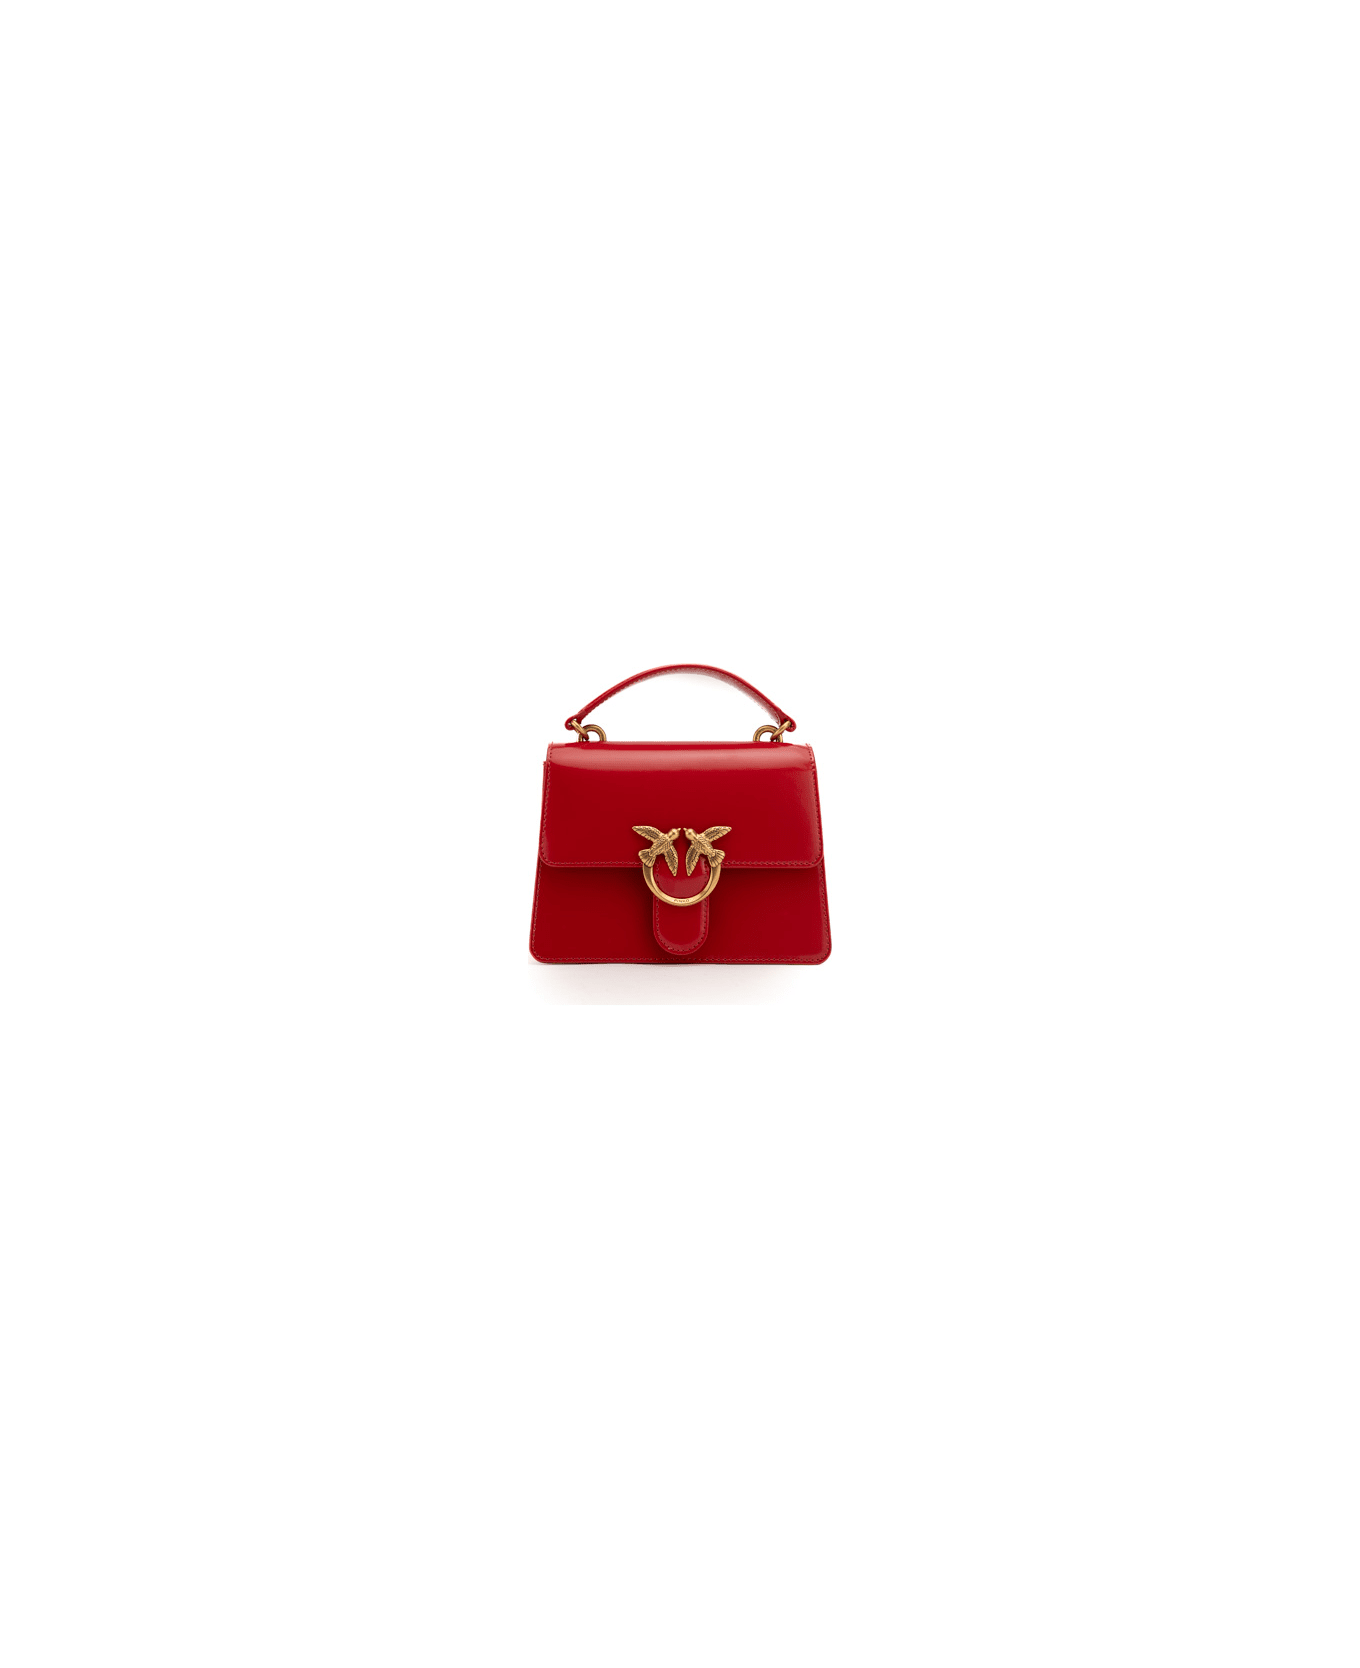 Pinko Mini Love One Top Handle Light Bag In Red Shiny Leather - Red トートバッグ